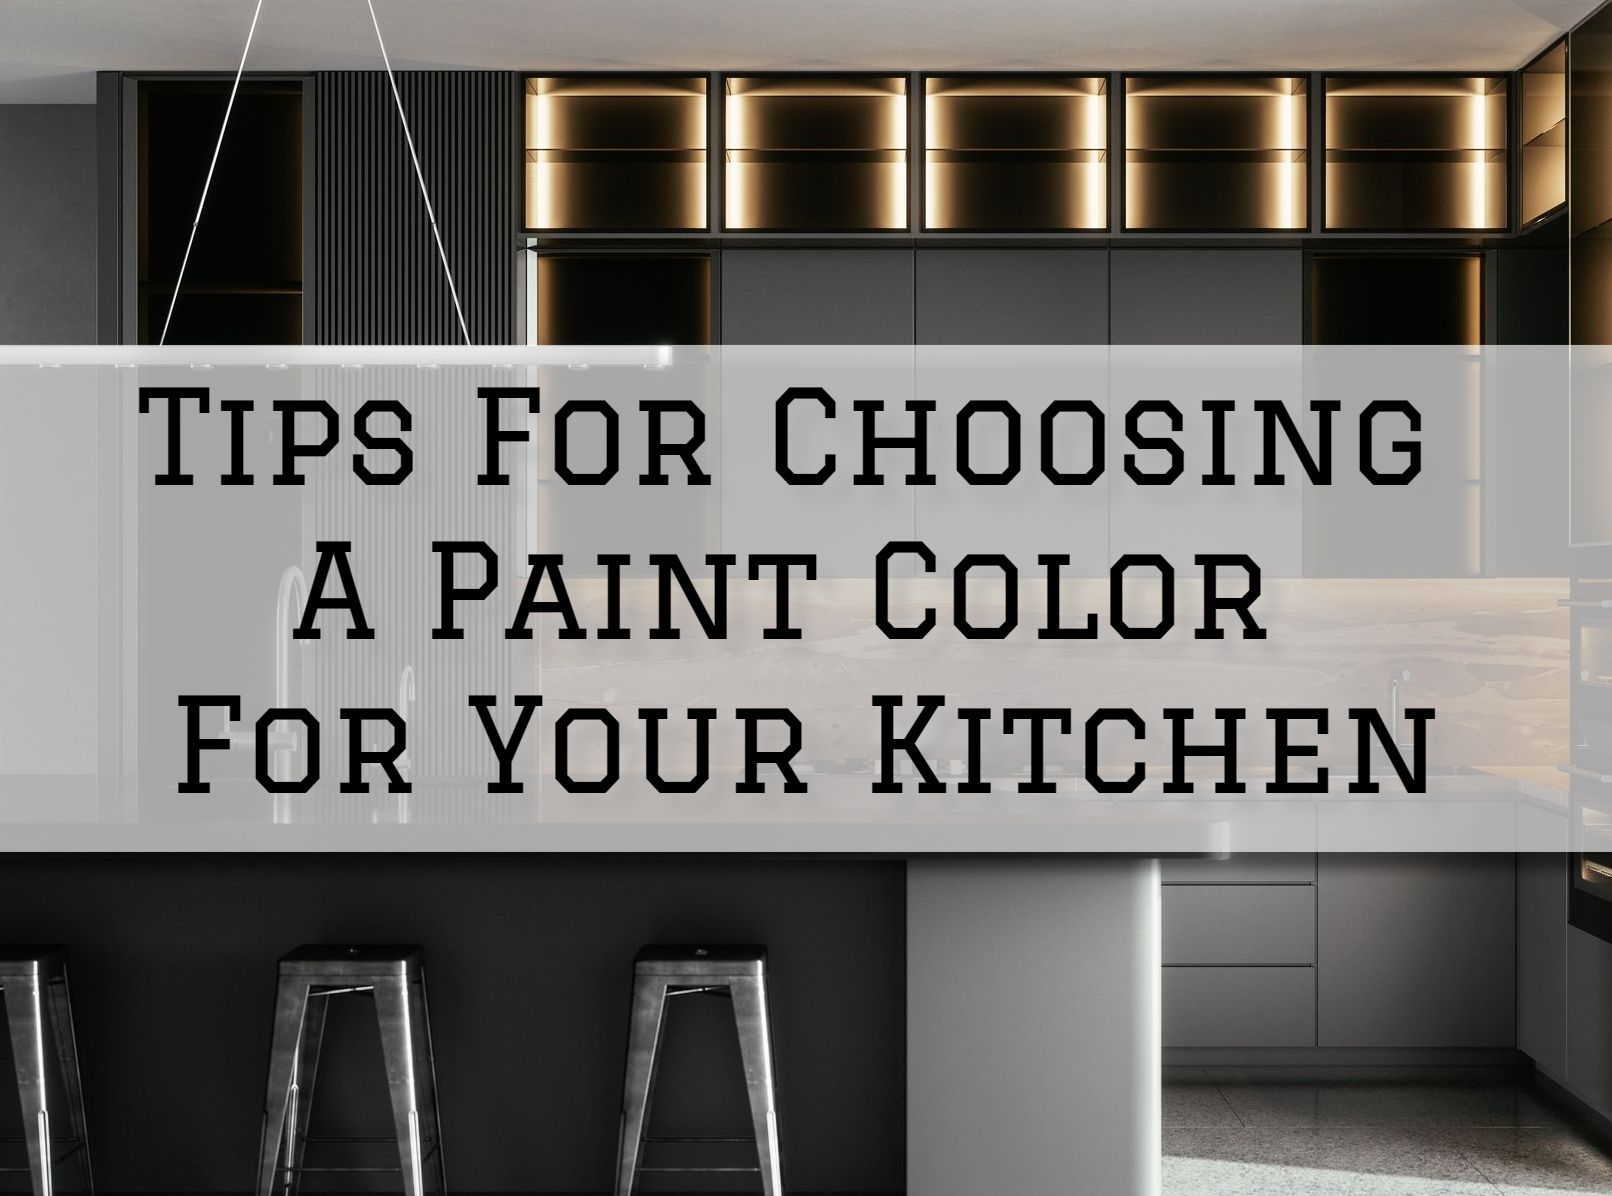 2023-01-09 New Haven Painters Milford CT Tips For Choosing A Paint Color For Your Kitchen